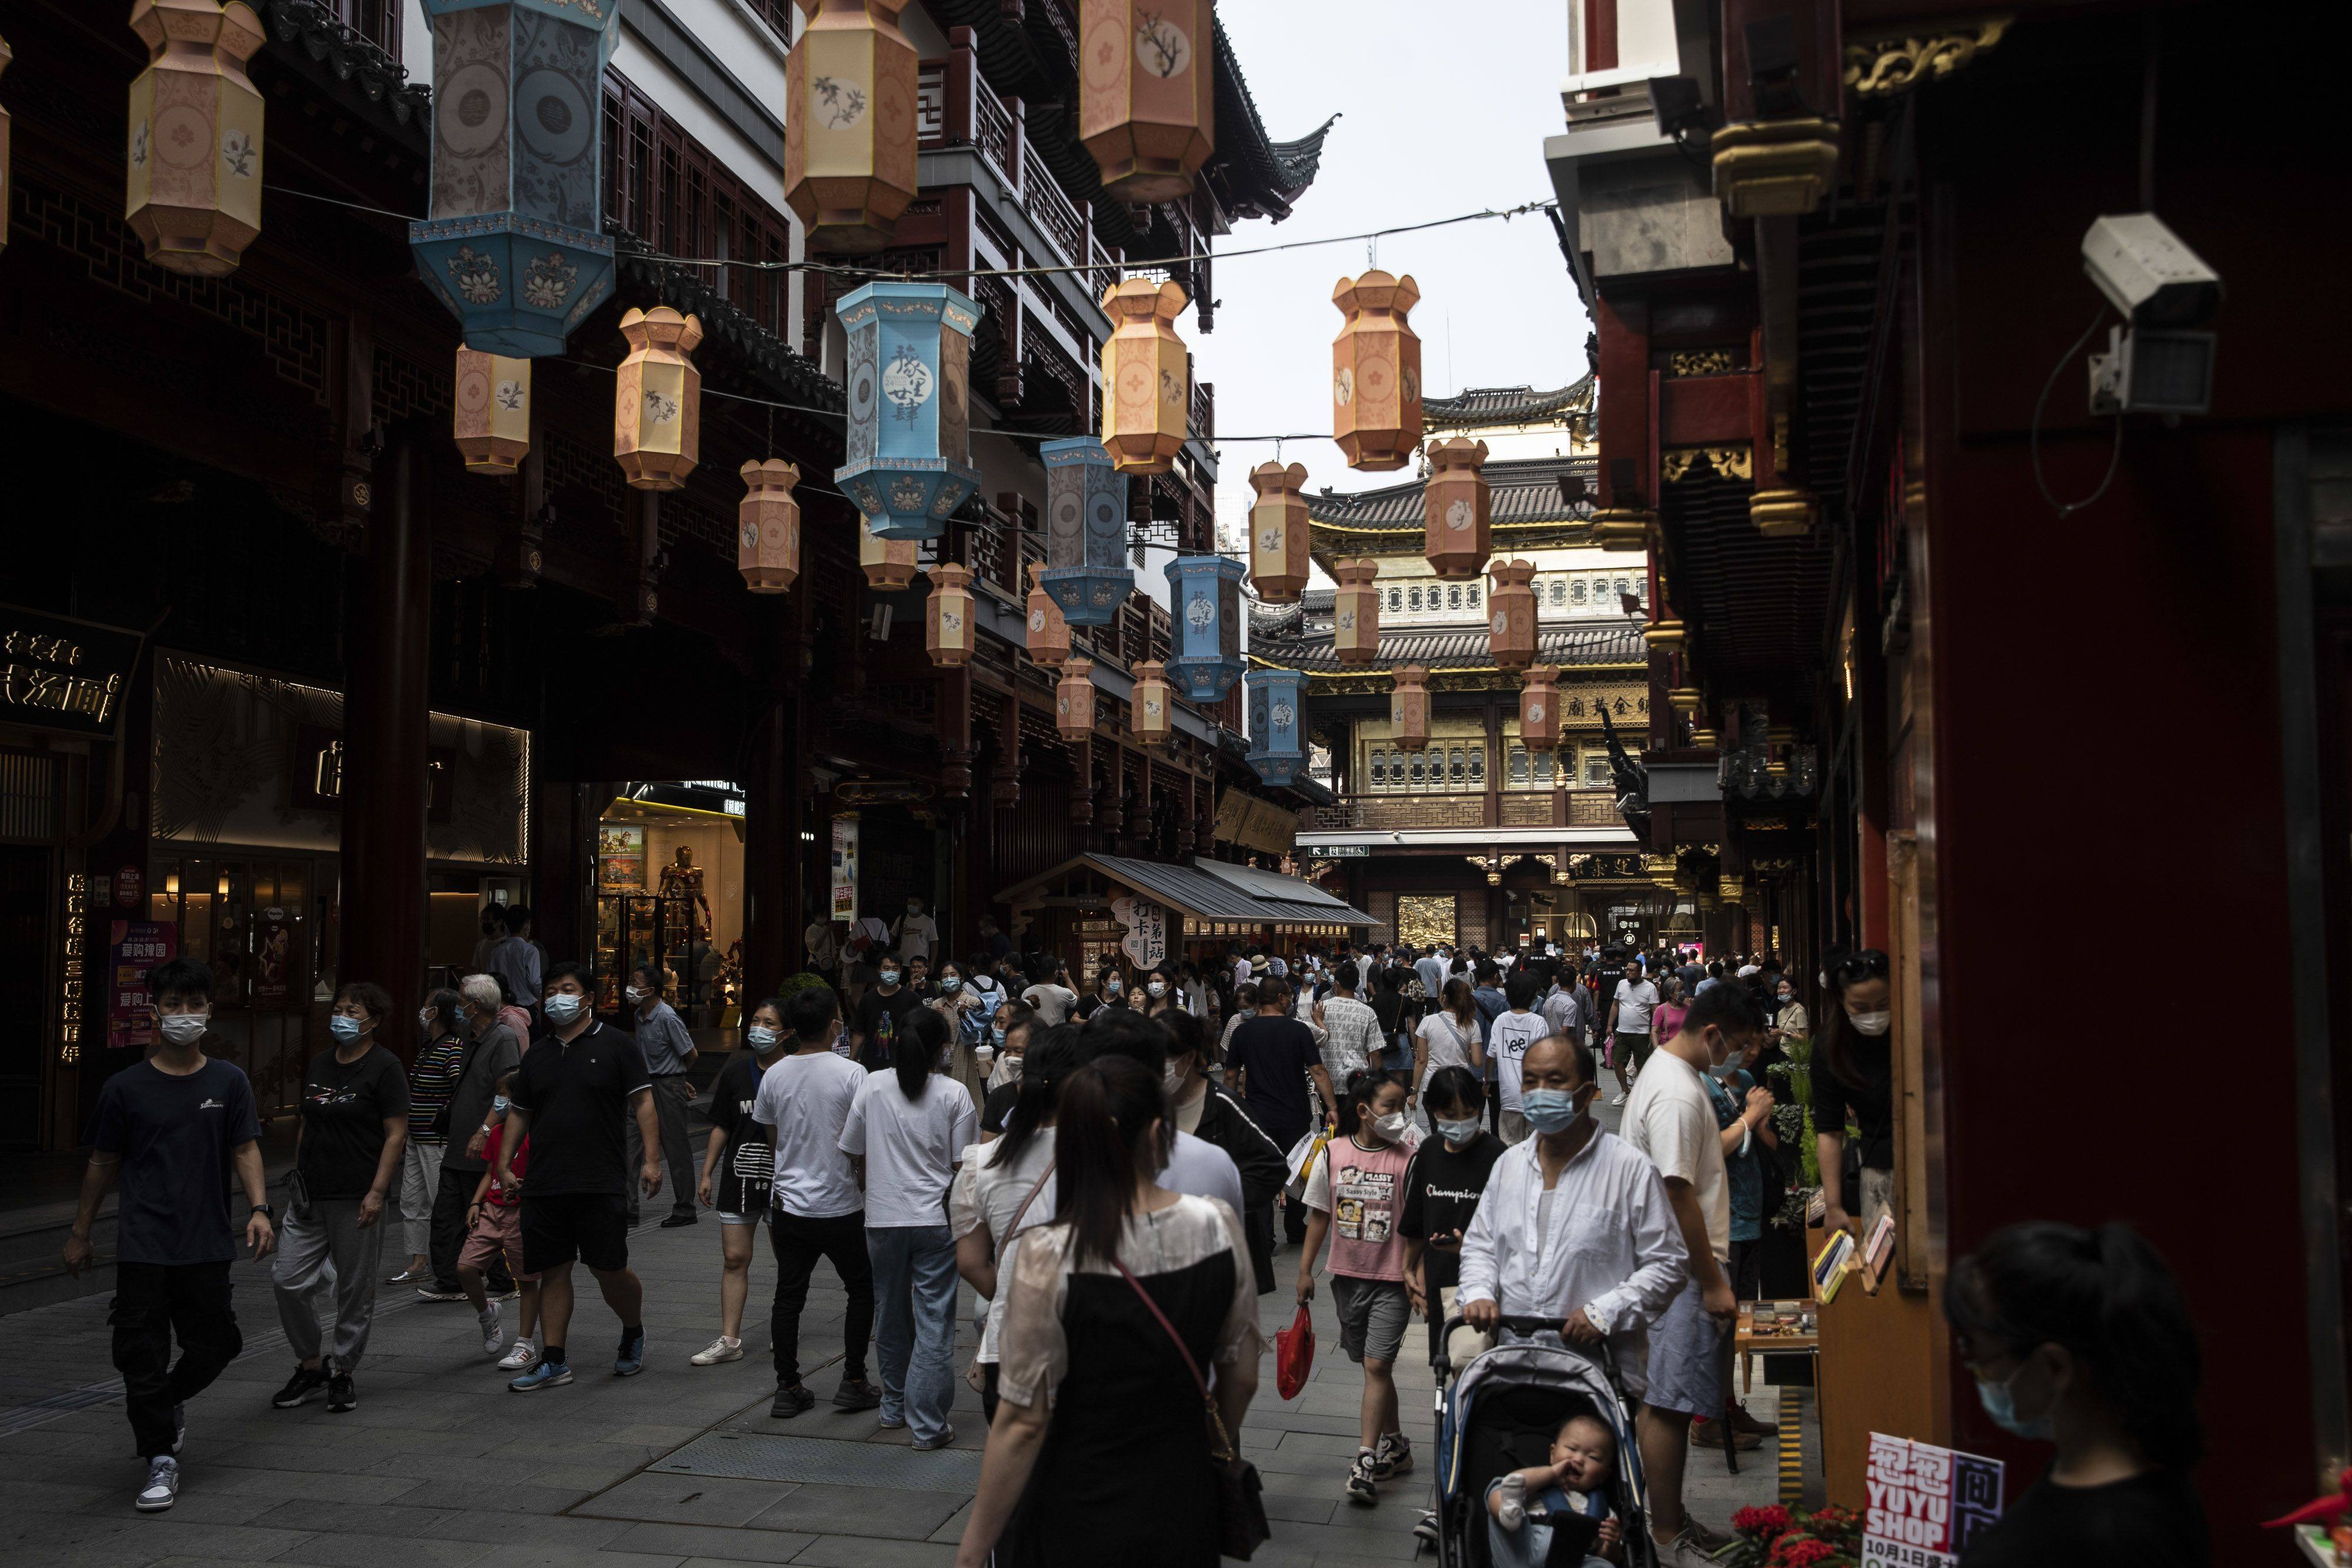 Visitors walk through the Yuyuan Garden in Shanghai on October 2. Photo: Bloomberg